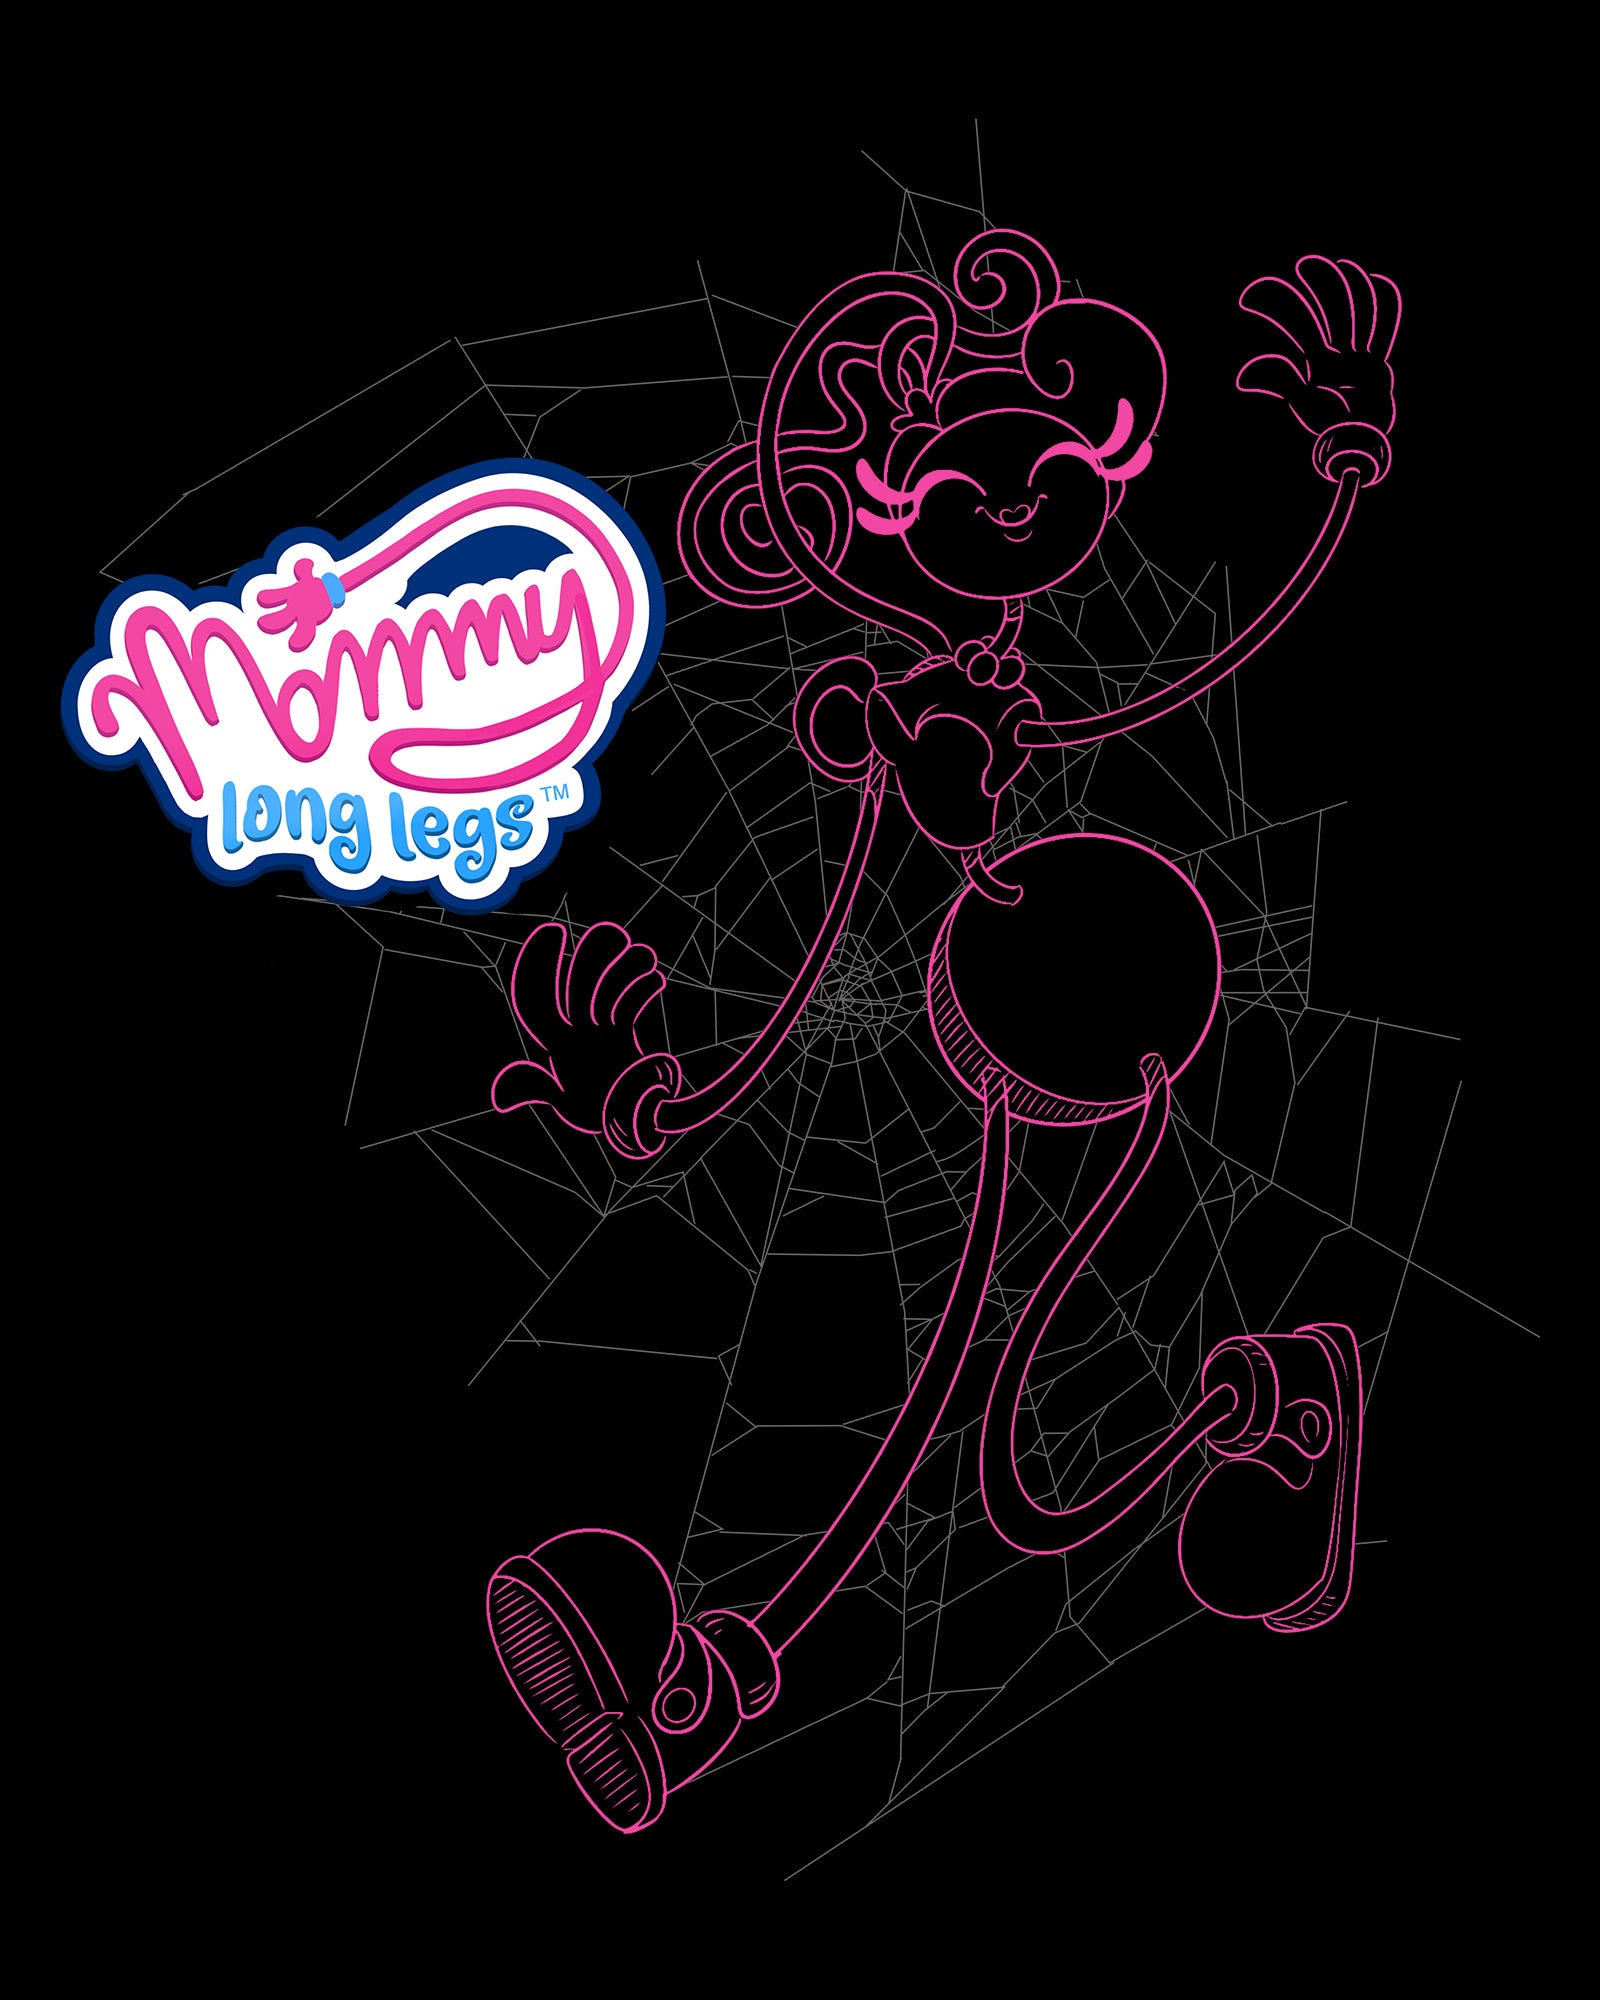 image on shirt: mommy long legs smiling walking and waving. spider web design behind her. logo. text: mommy long legs